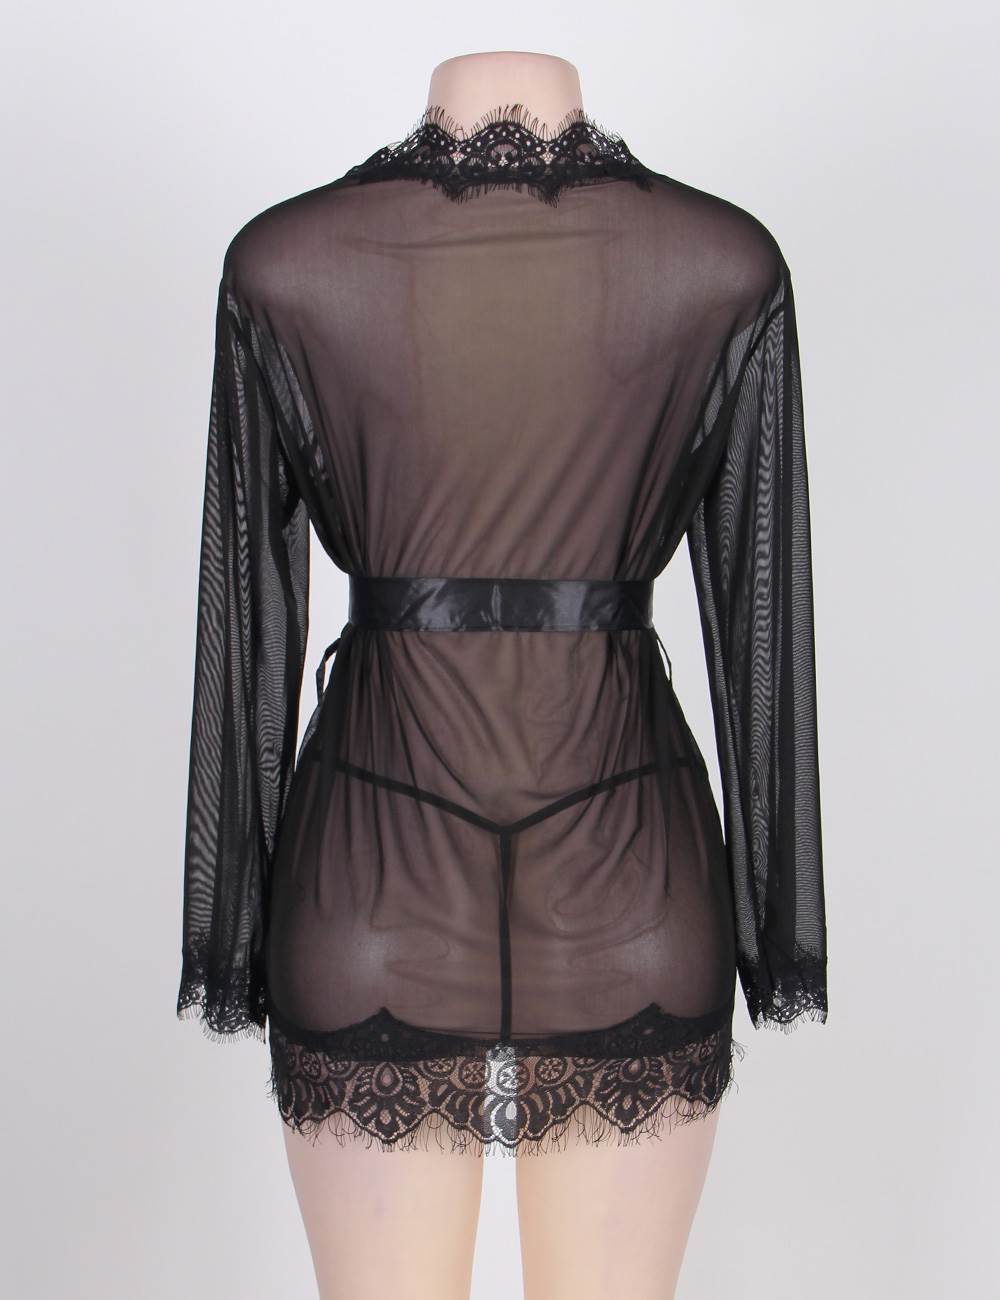 Top Quality Black Sheer Lace Trim Sexy Robe With Belts